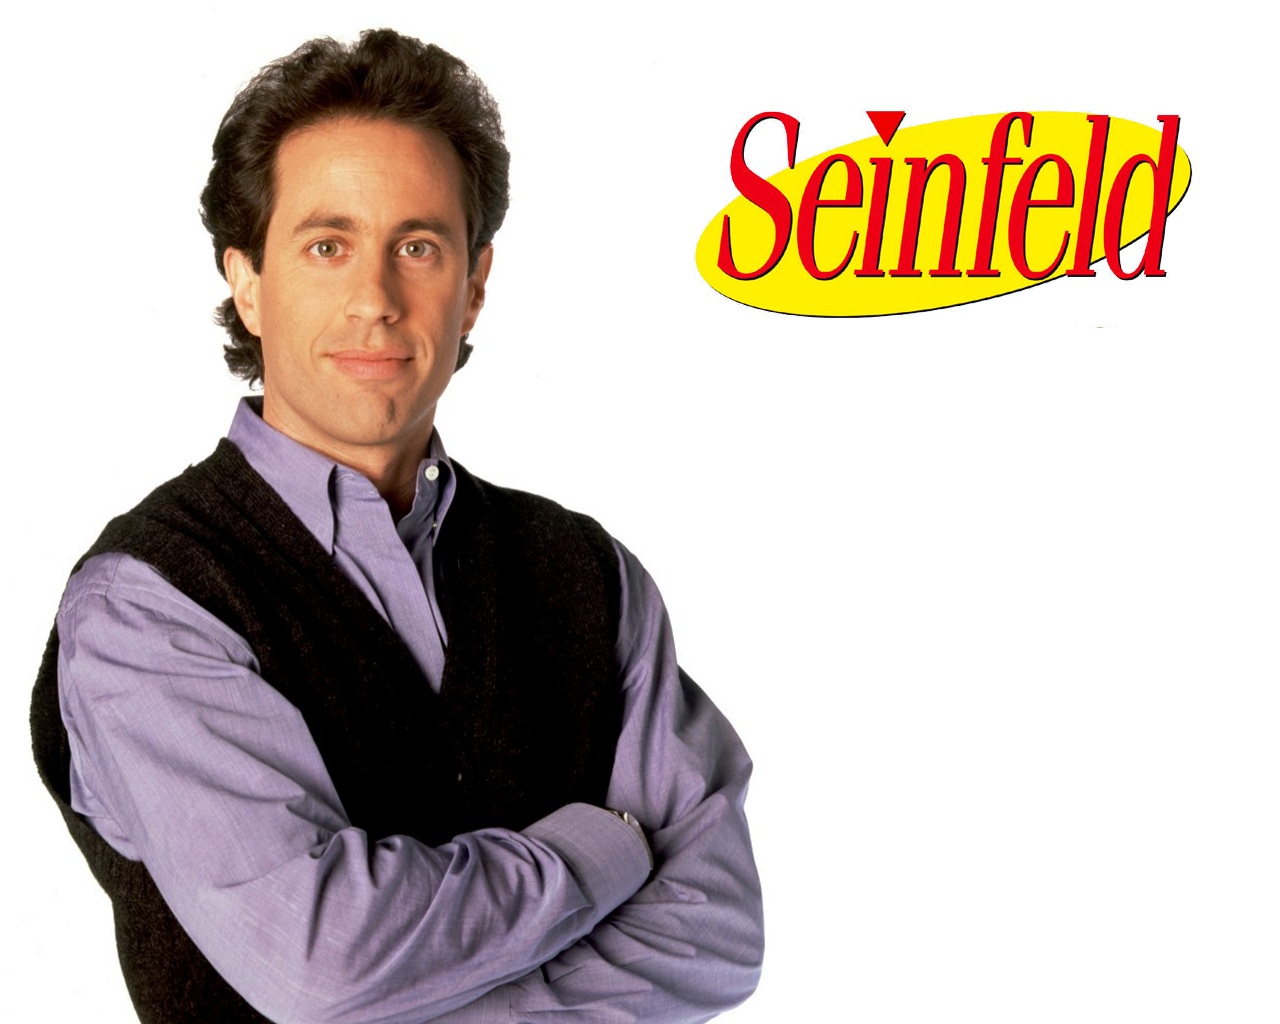 19 Iphone wallpaper ideas  seinfeld seinfeld quotes jerry seinfeld